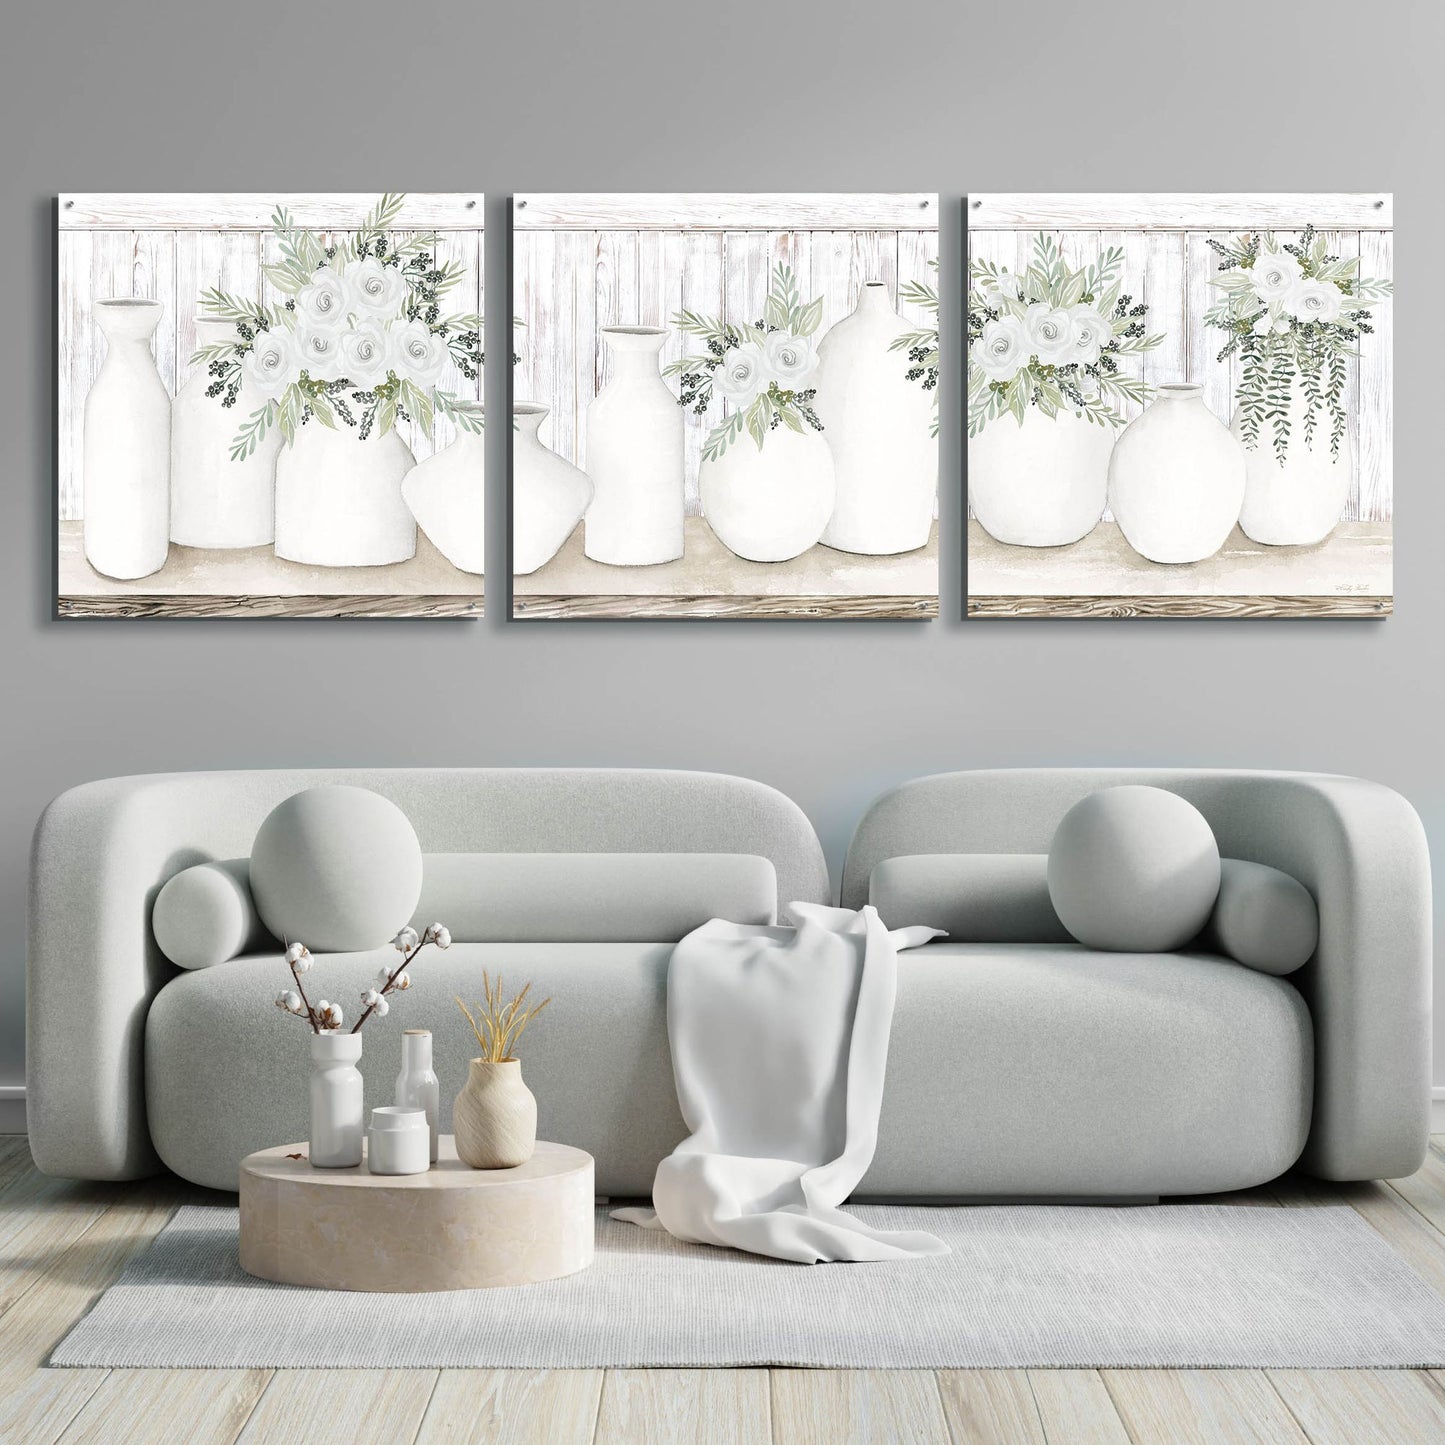 Epic Art 'White Simplicity' by Cindy Jacobs, Acrylic Glass Wall Art, 3 Piece Set,108x36